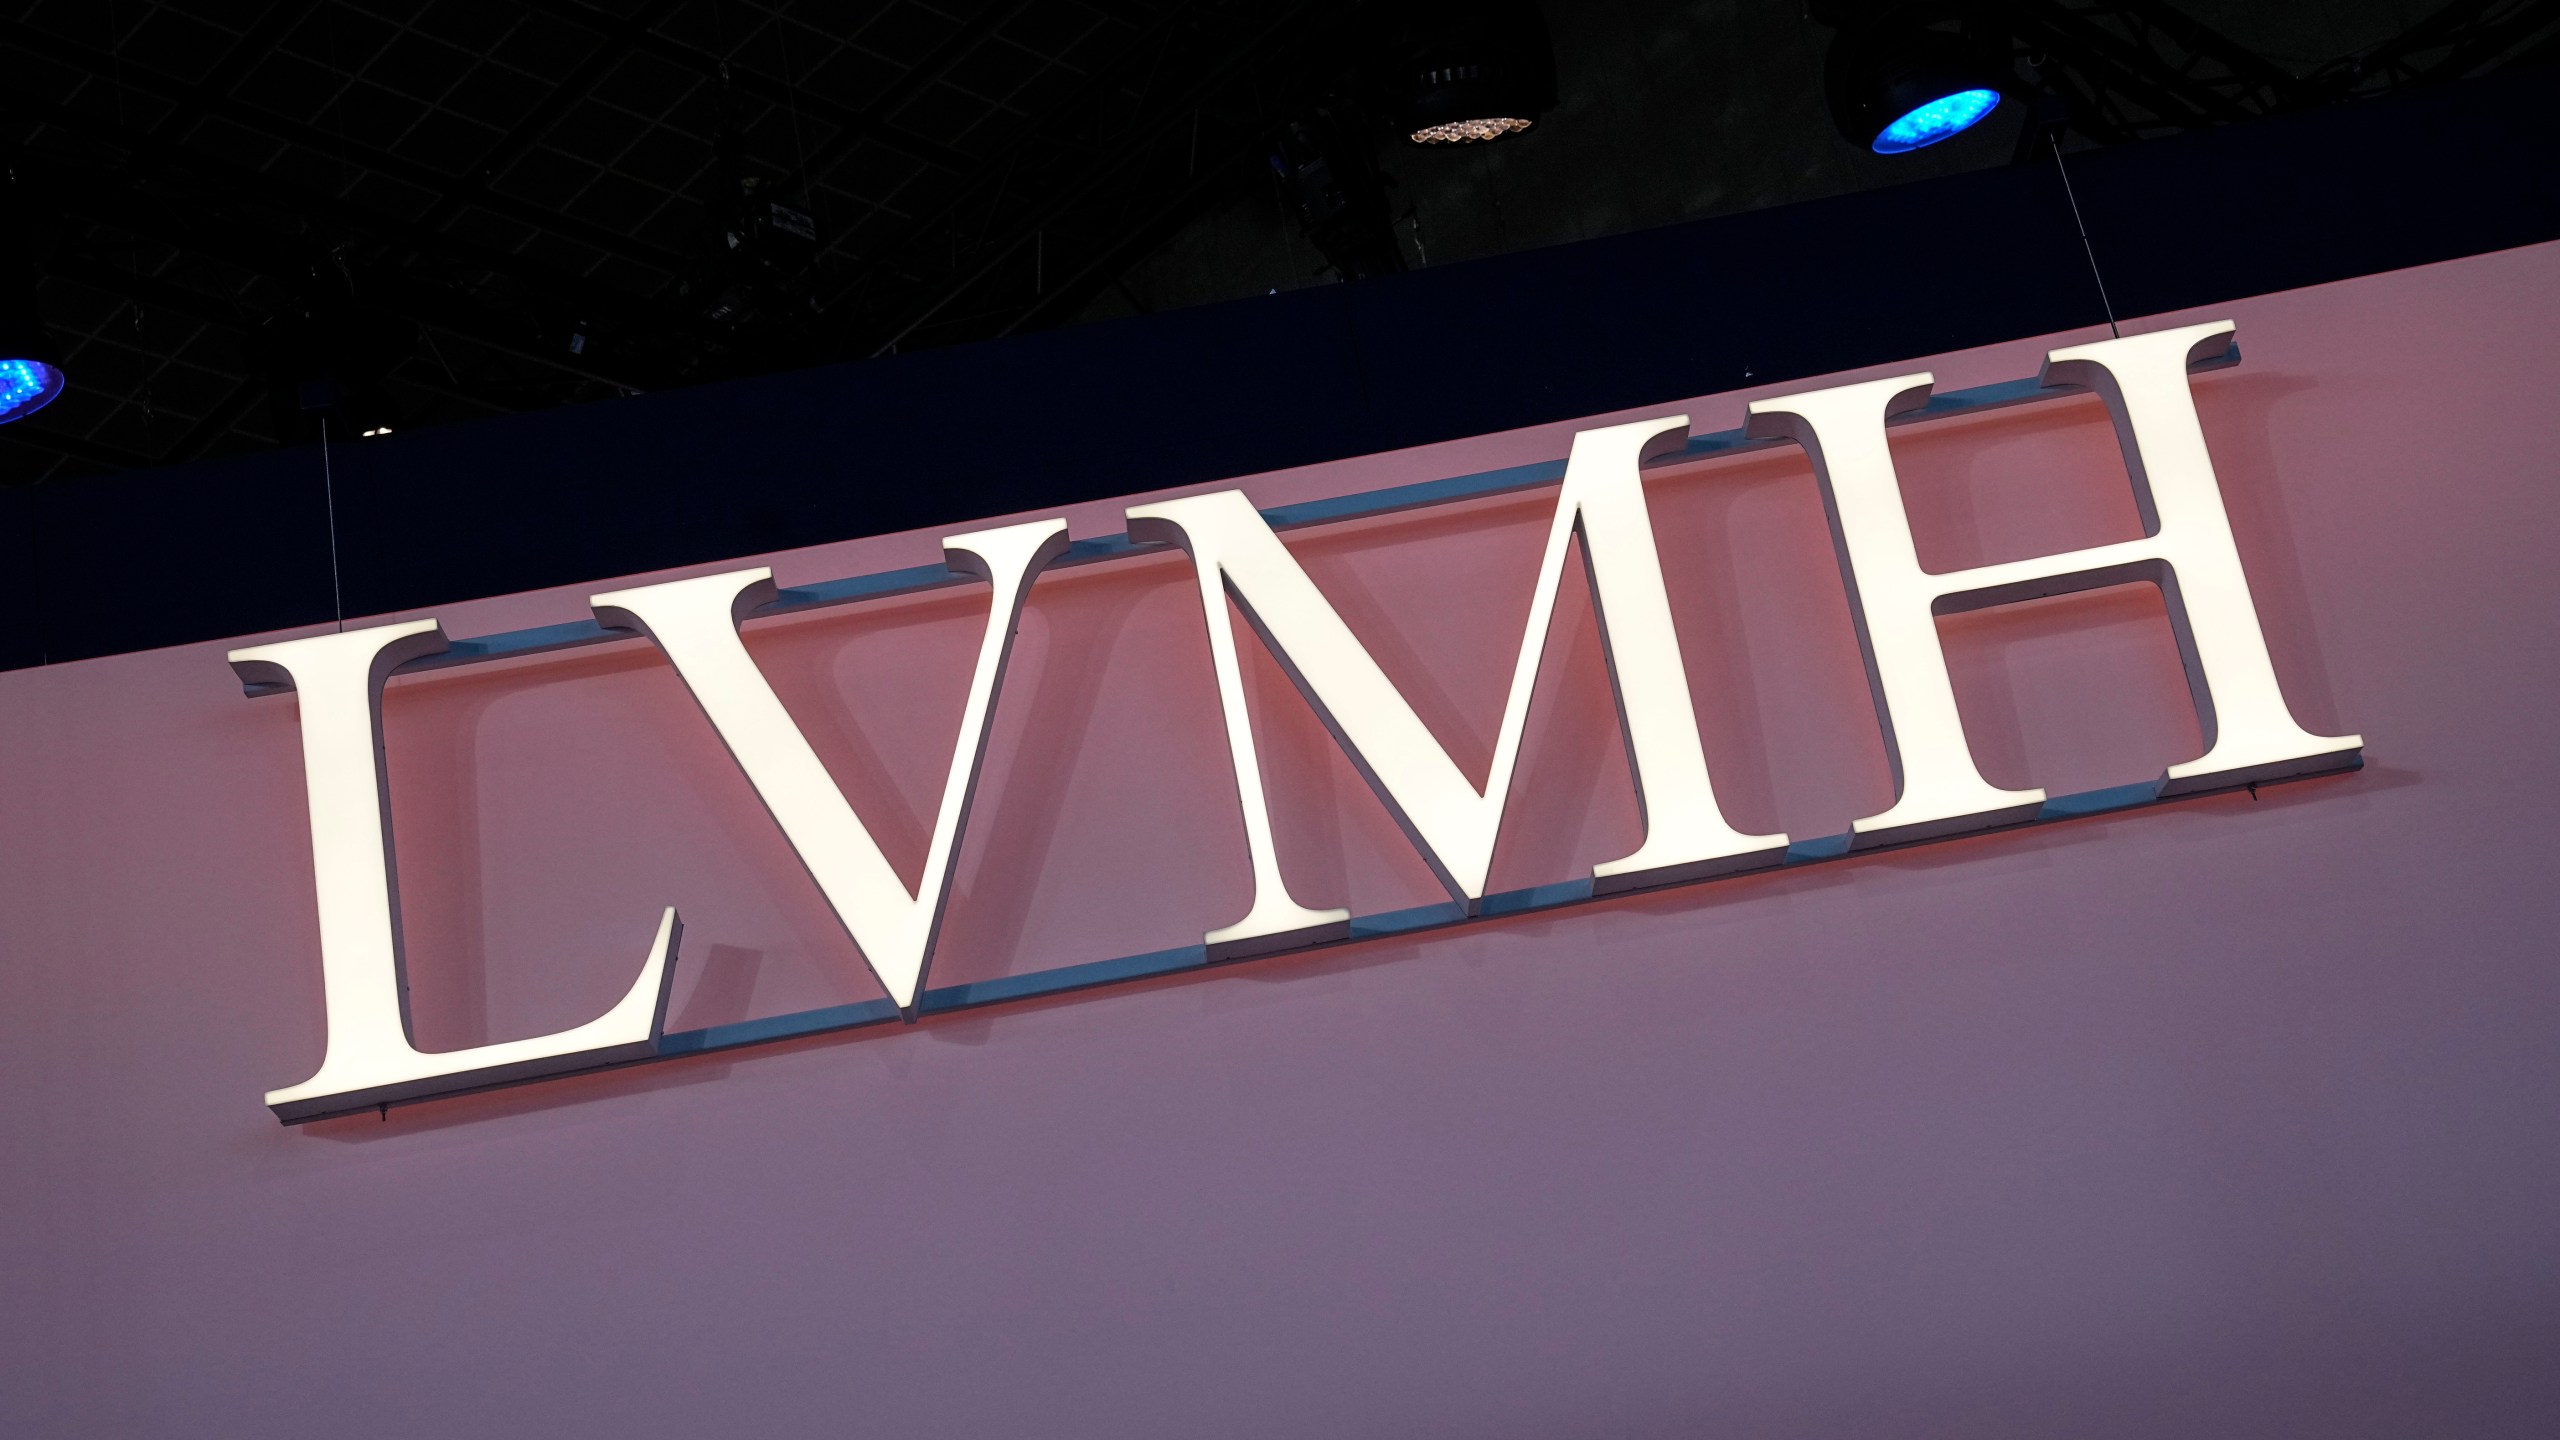 FILE - The LVMH logo is photographed at the Vivatech show in Paris, June 15, 2023. The world’s biggest luxury group, LVMH Moët Hennessy Louis Vuitton, officially announced a sponsorship deal Monday, July 24, 2023 with the 2024 Paris Olympics and Paralympics, joining the ranks of top-tier French sponsors such as banking group BPCE, pharmaceutical maker Sanofi and supermarket operator Carrefour. (AP Photo/Michel Euler, File)